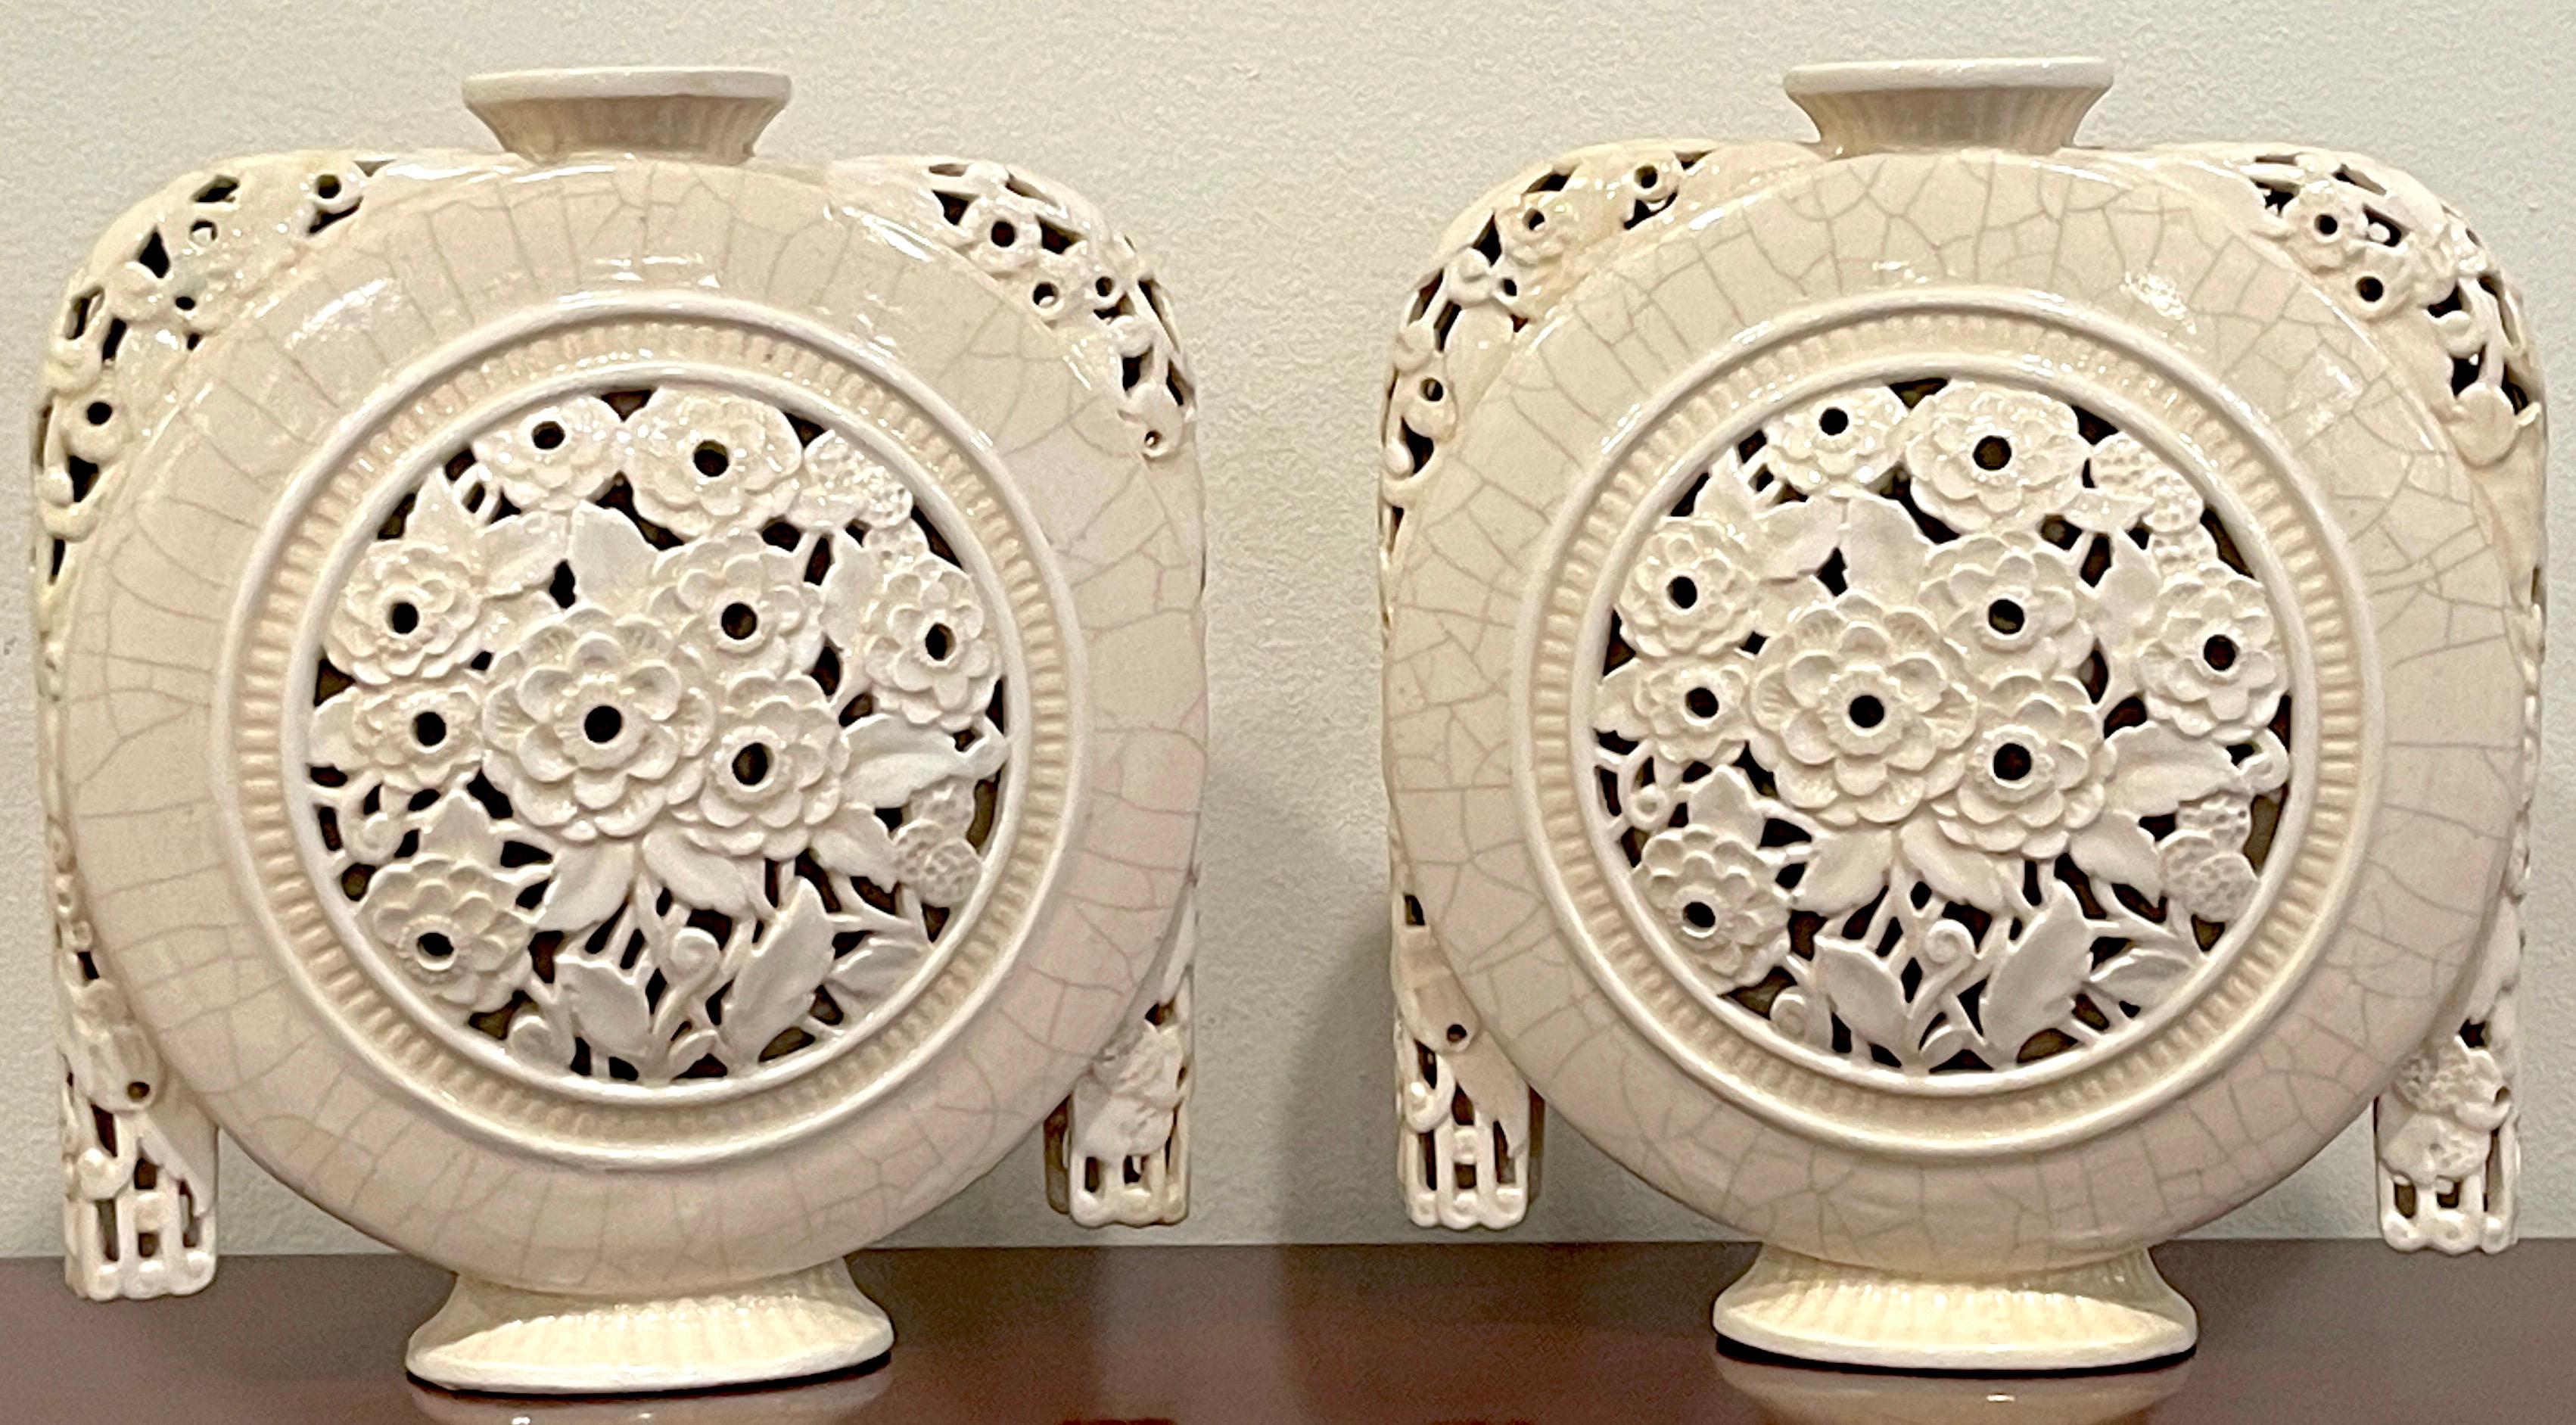 Pair of French Art Deco pierced moon flask vases by, Henri Chaumeil
France, Circa 1920-1930s
A iconic period example of the Art Deco style, made by renowned French potter Henri Chaumeil. Each vase of moon flask form with pierced draped handles,